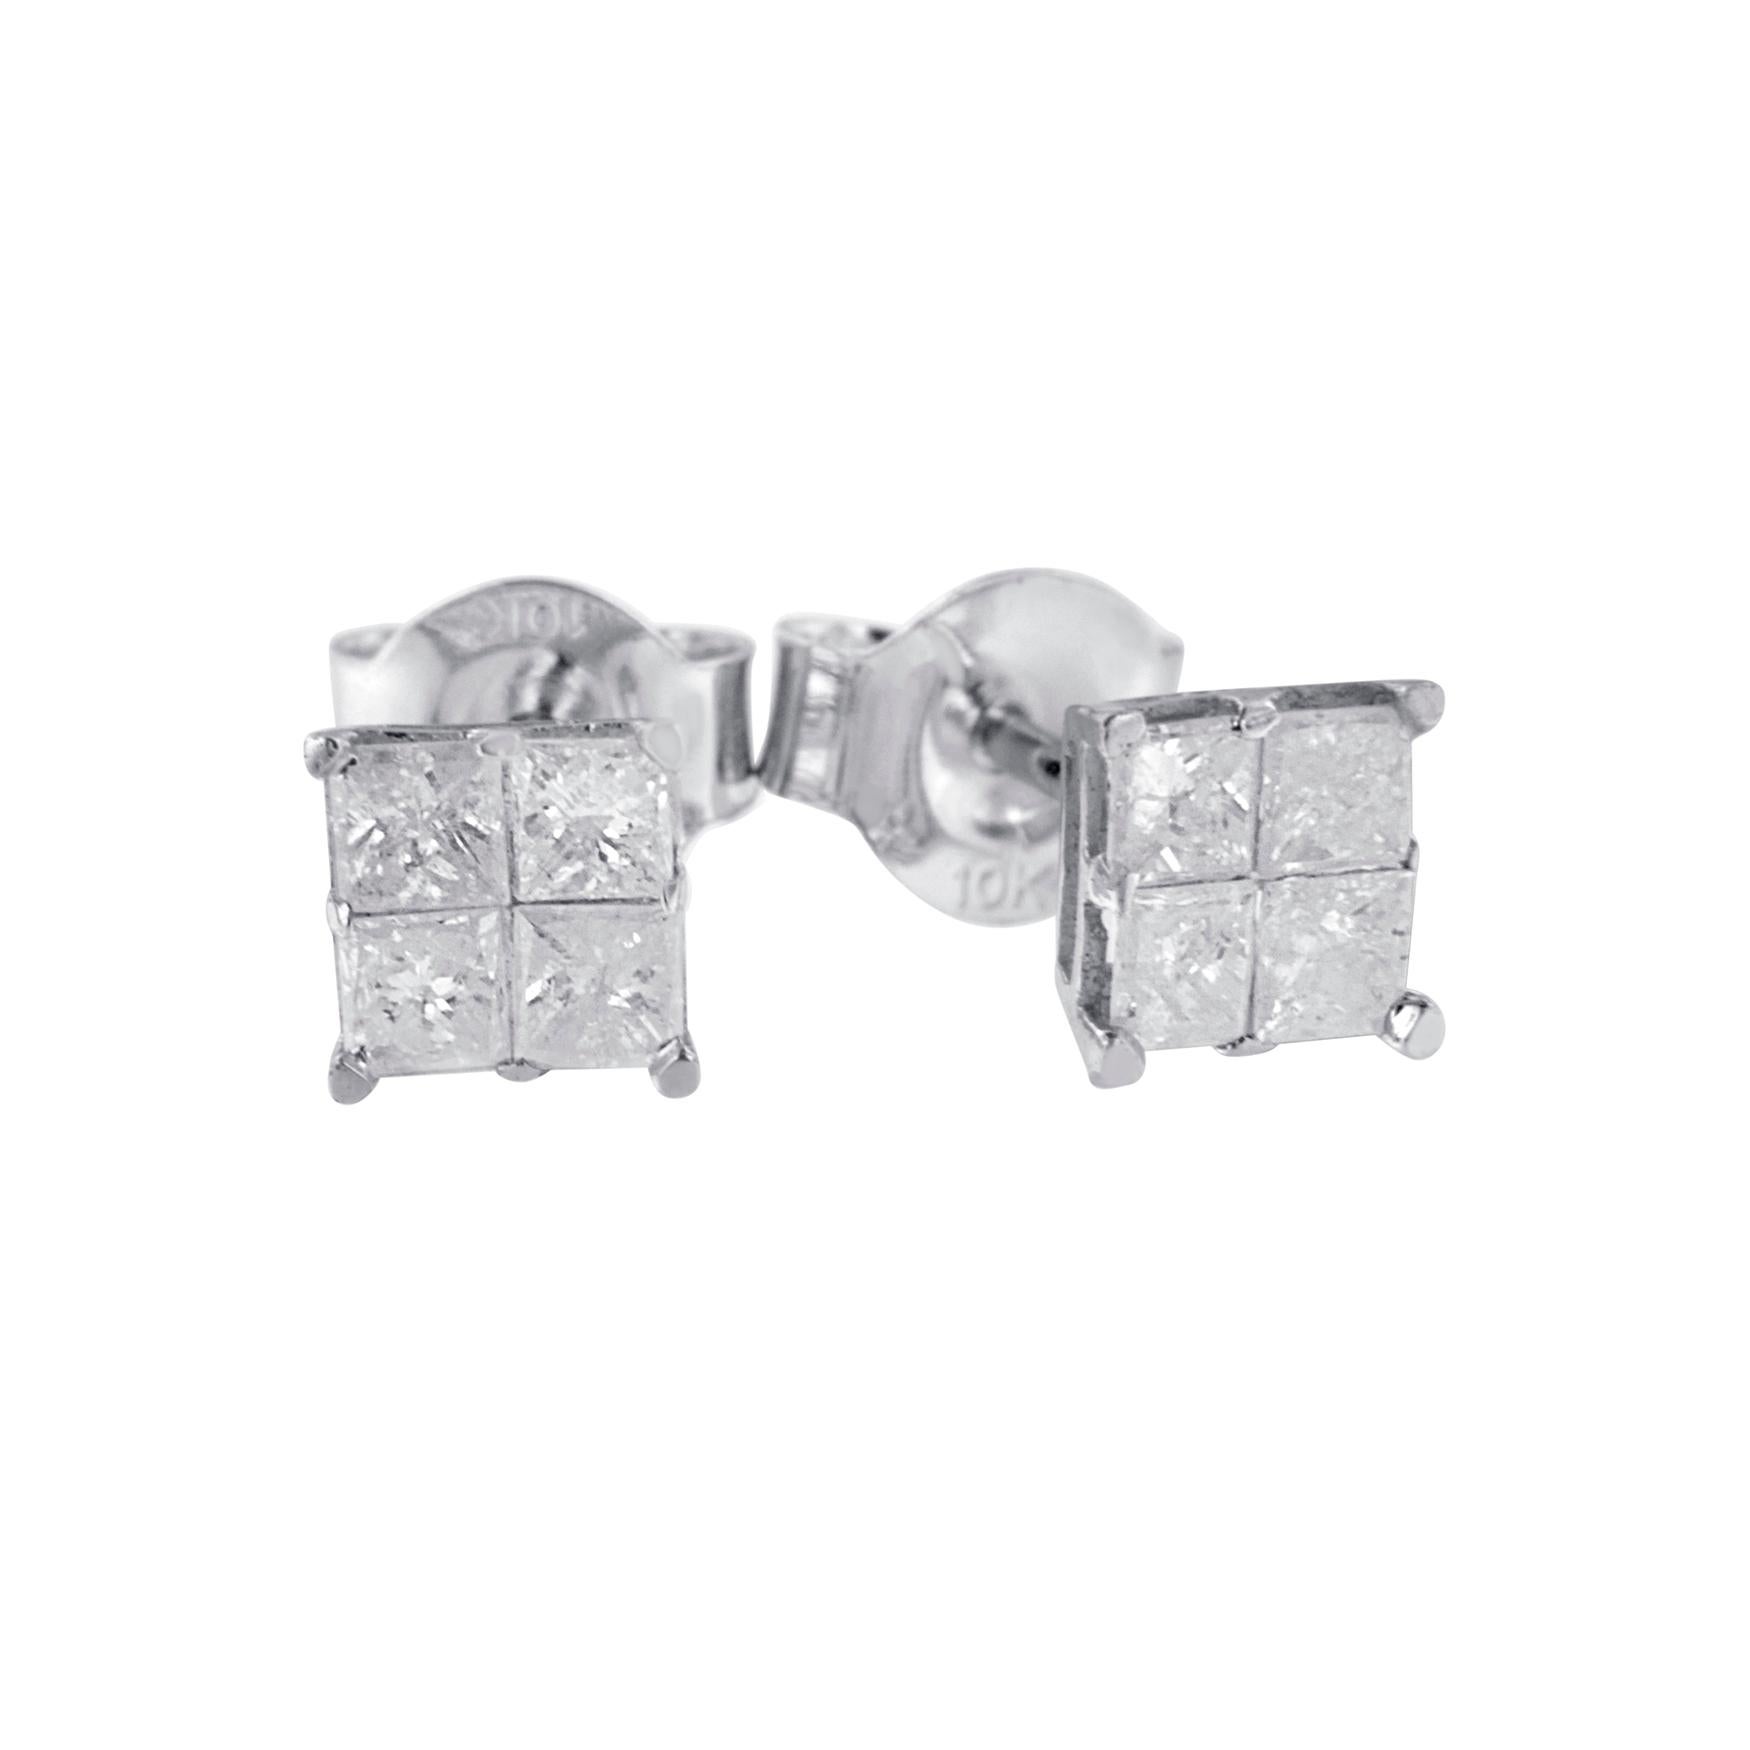 Holding eight beautiful princess-cut diamonds in an invisible pattern, these stud earrings also features 10 karat of white gold. Being secured with the pushback mechanism, this piece is quite comfortable to wear and remove. One can go for carrying